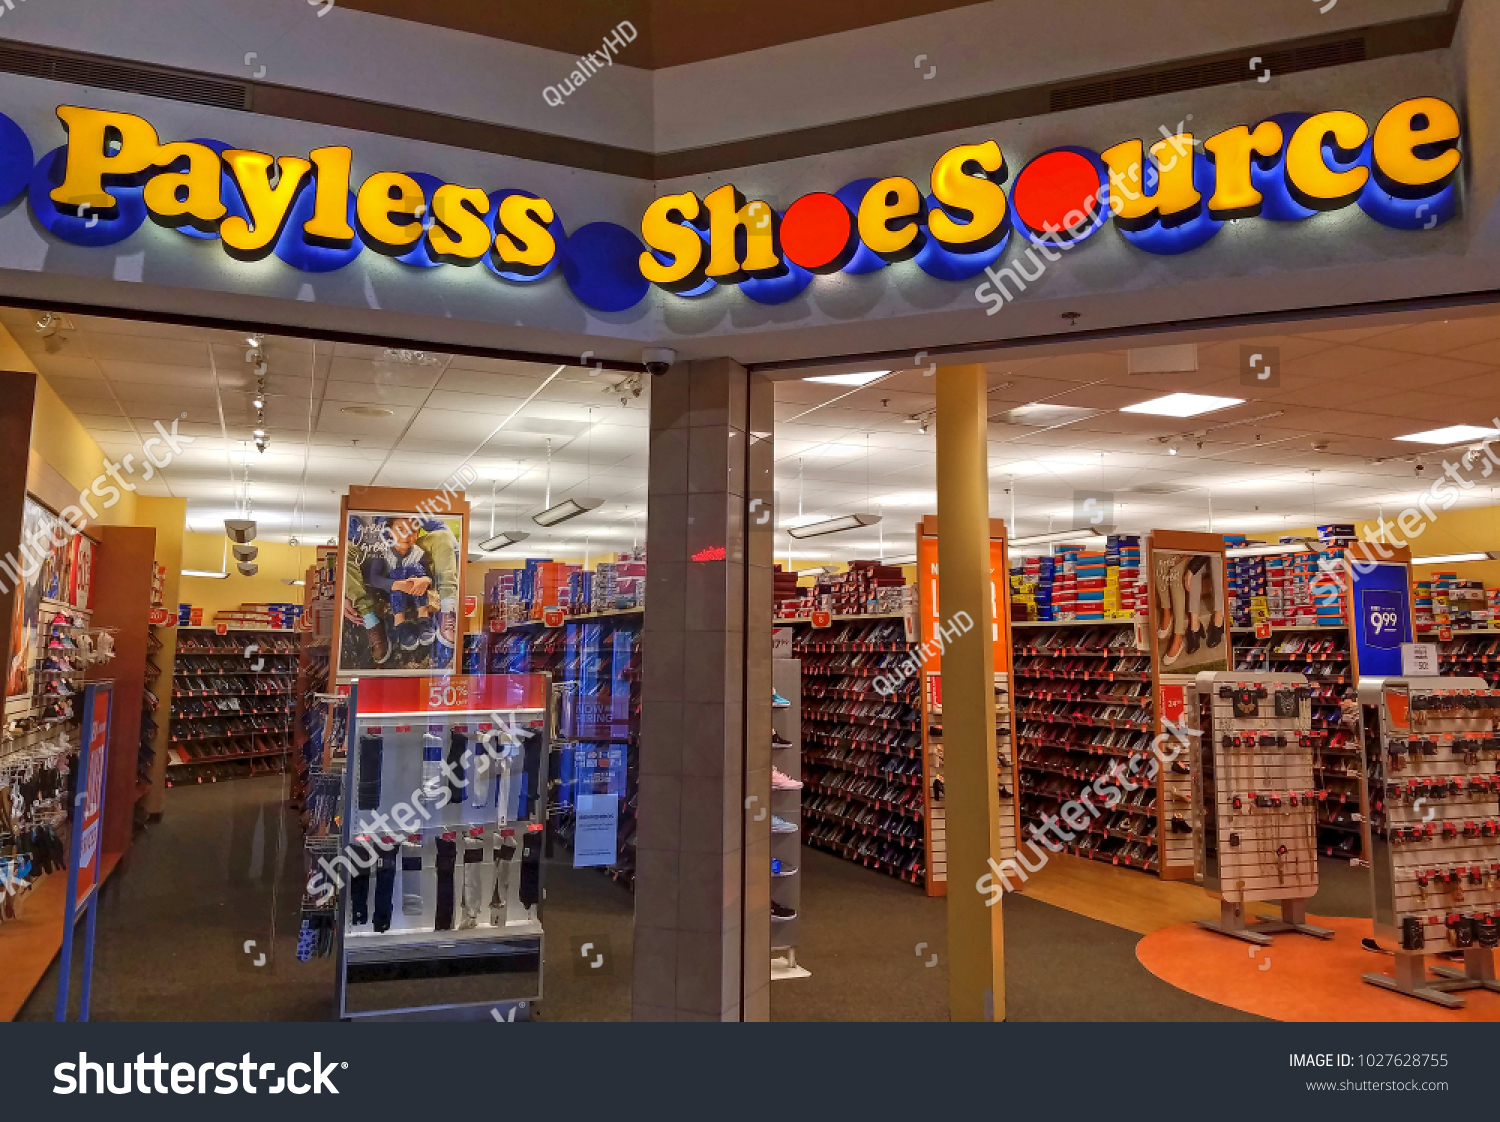 payless shoesource stock